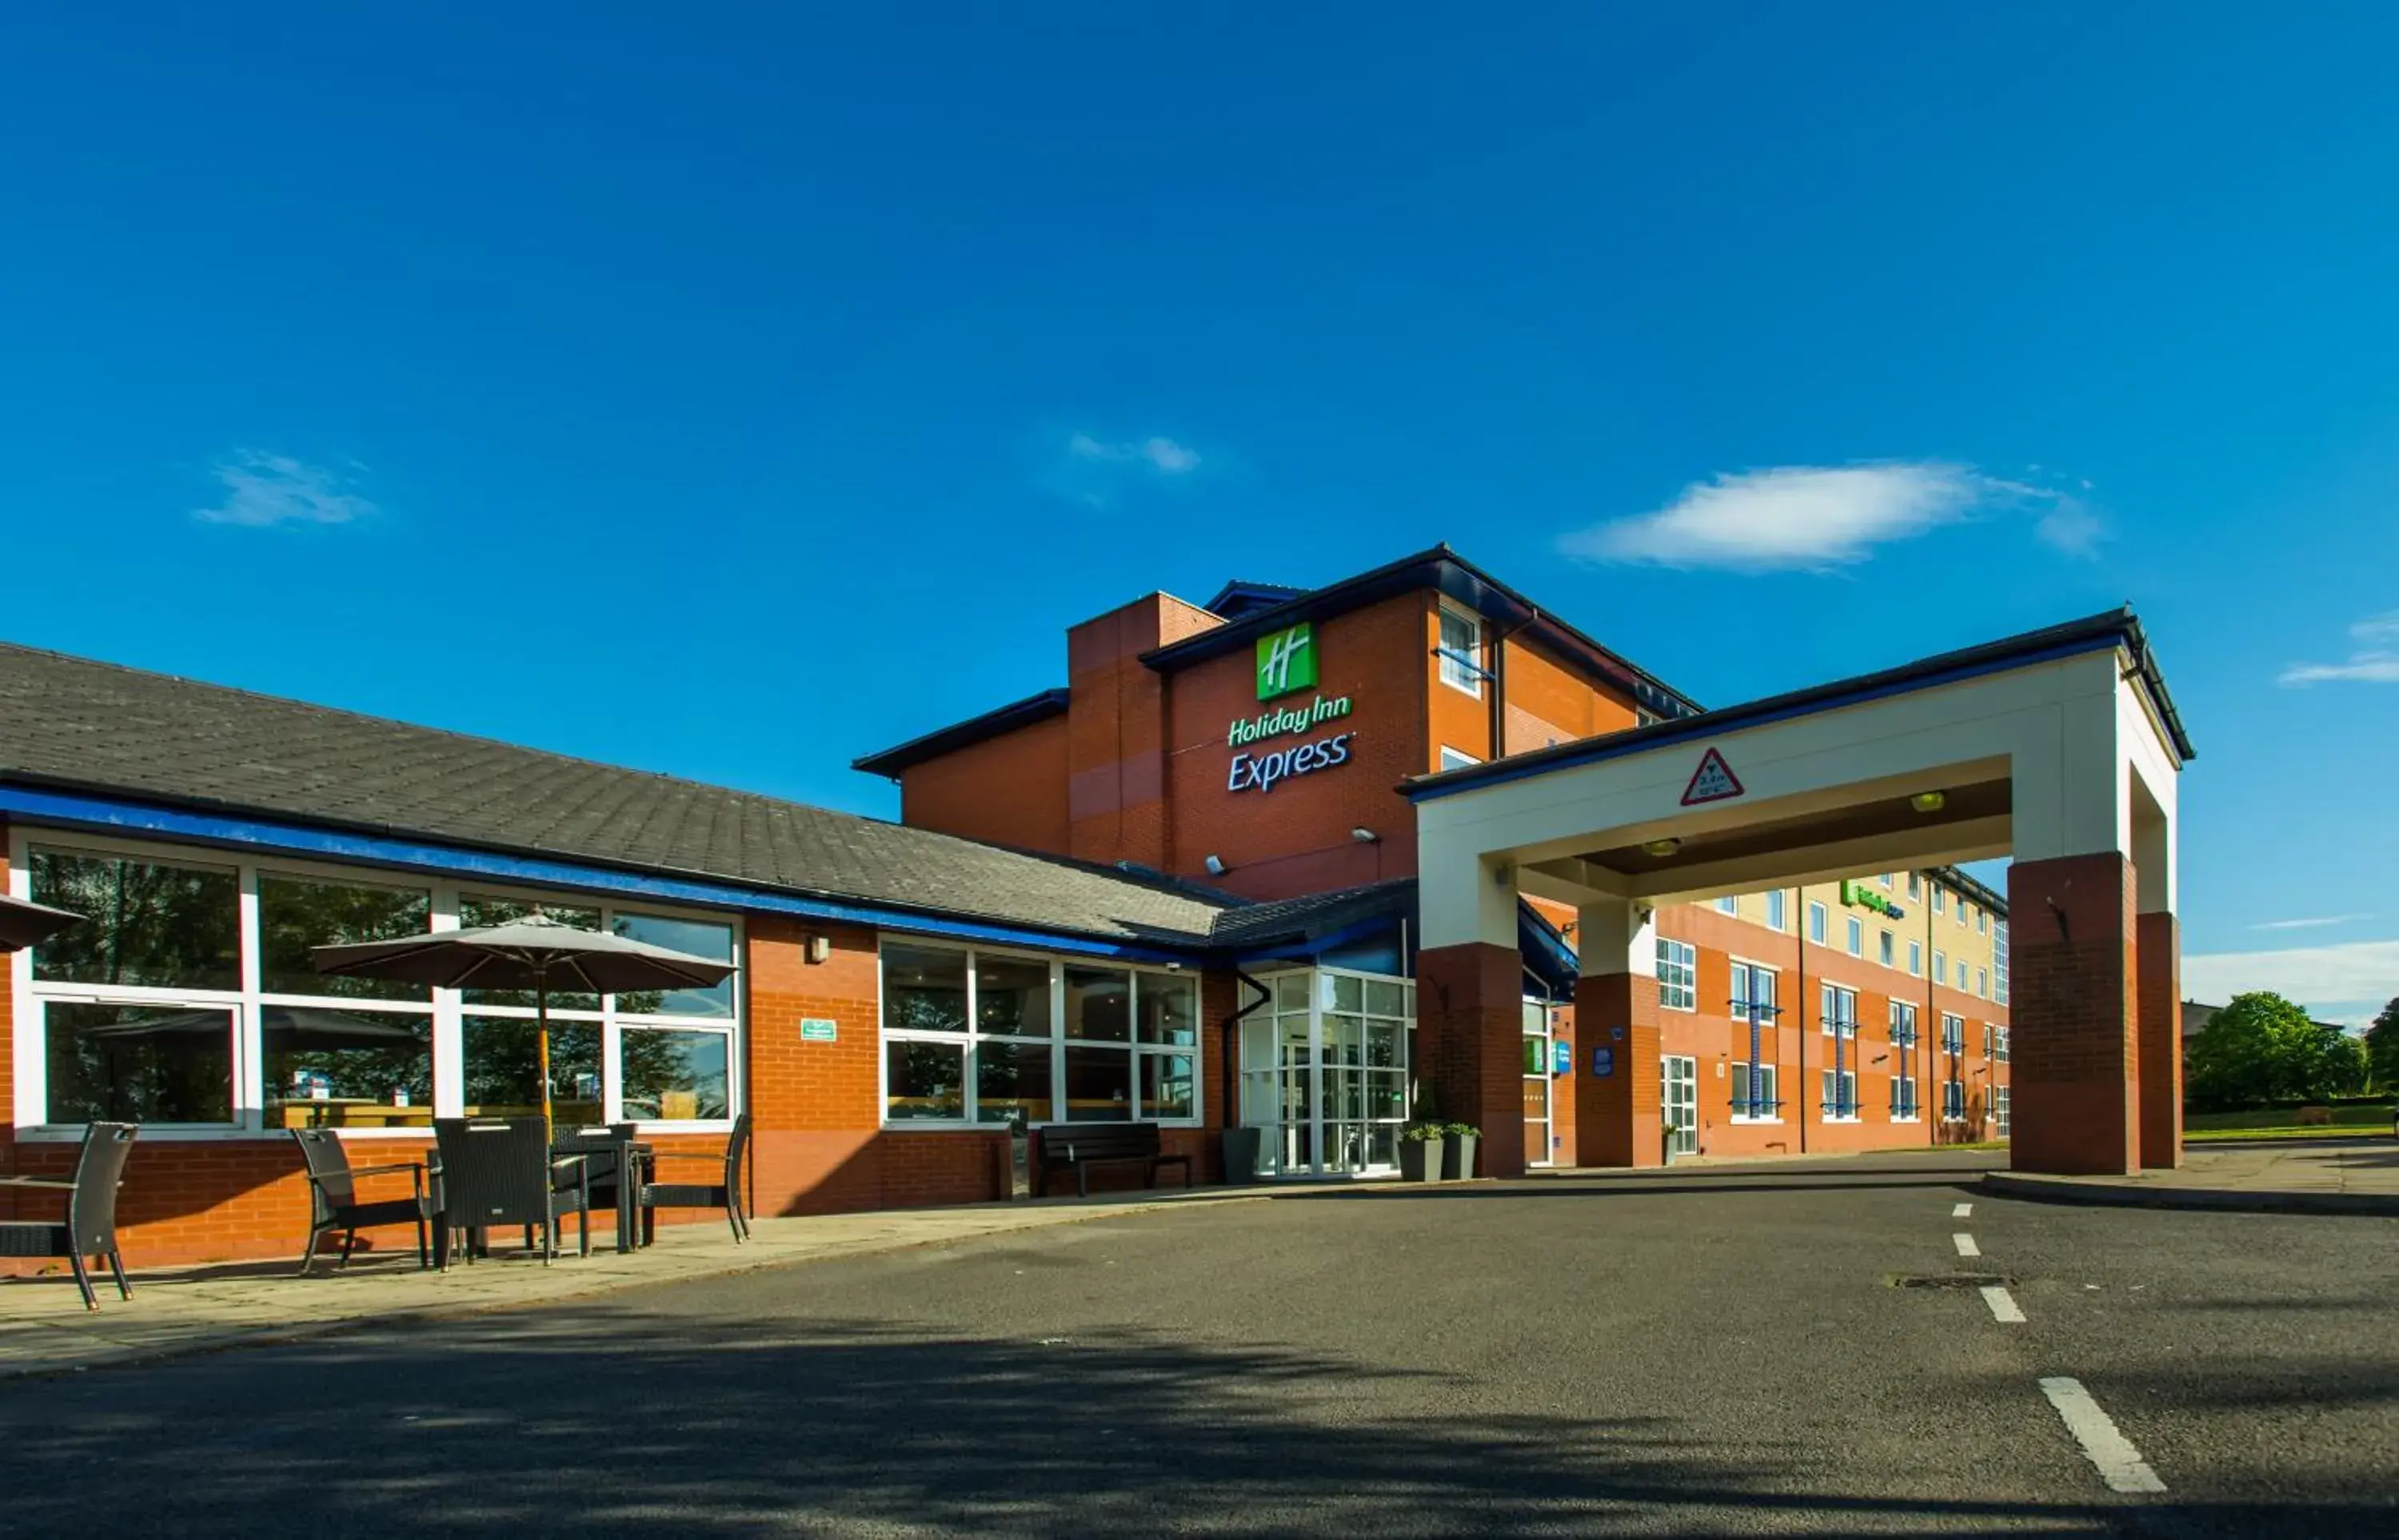 Property Building in Holiday Inn Express Burton On Trent